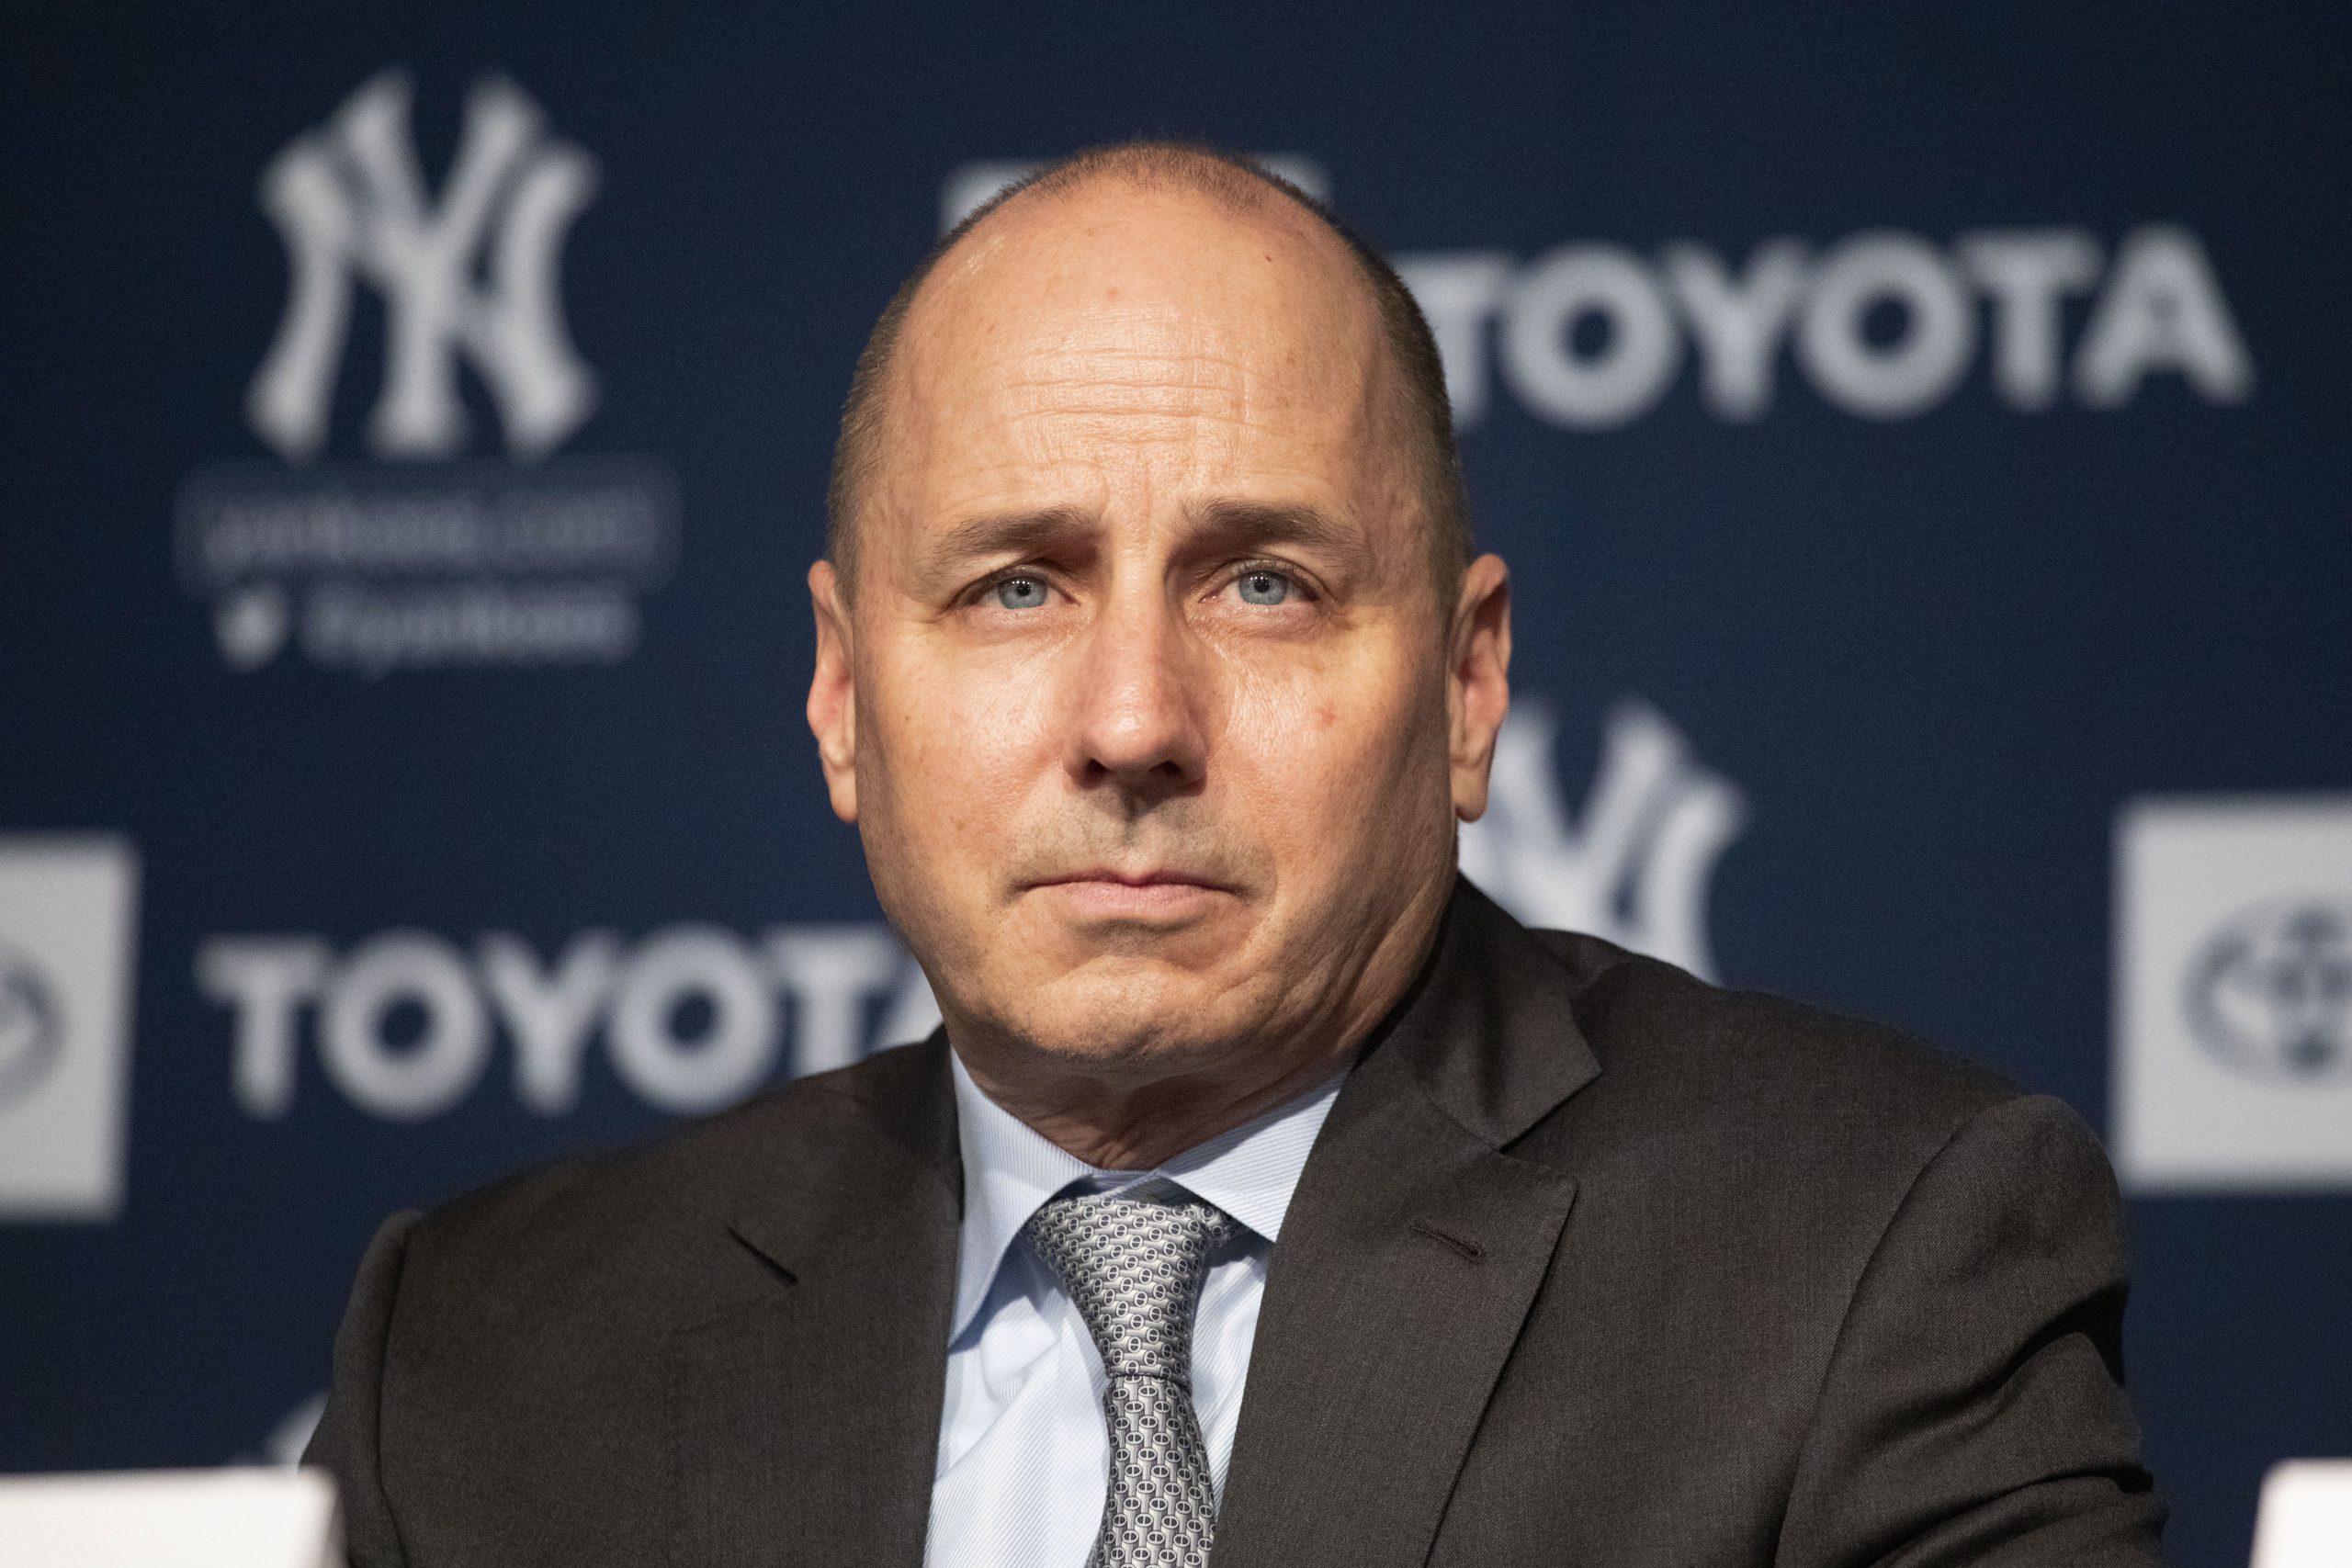 New York Yankees GM Brian Cashman had some more bad news for his fan base about superstar Aaron Judge prior to Opening Day on Friday